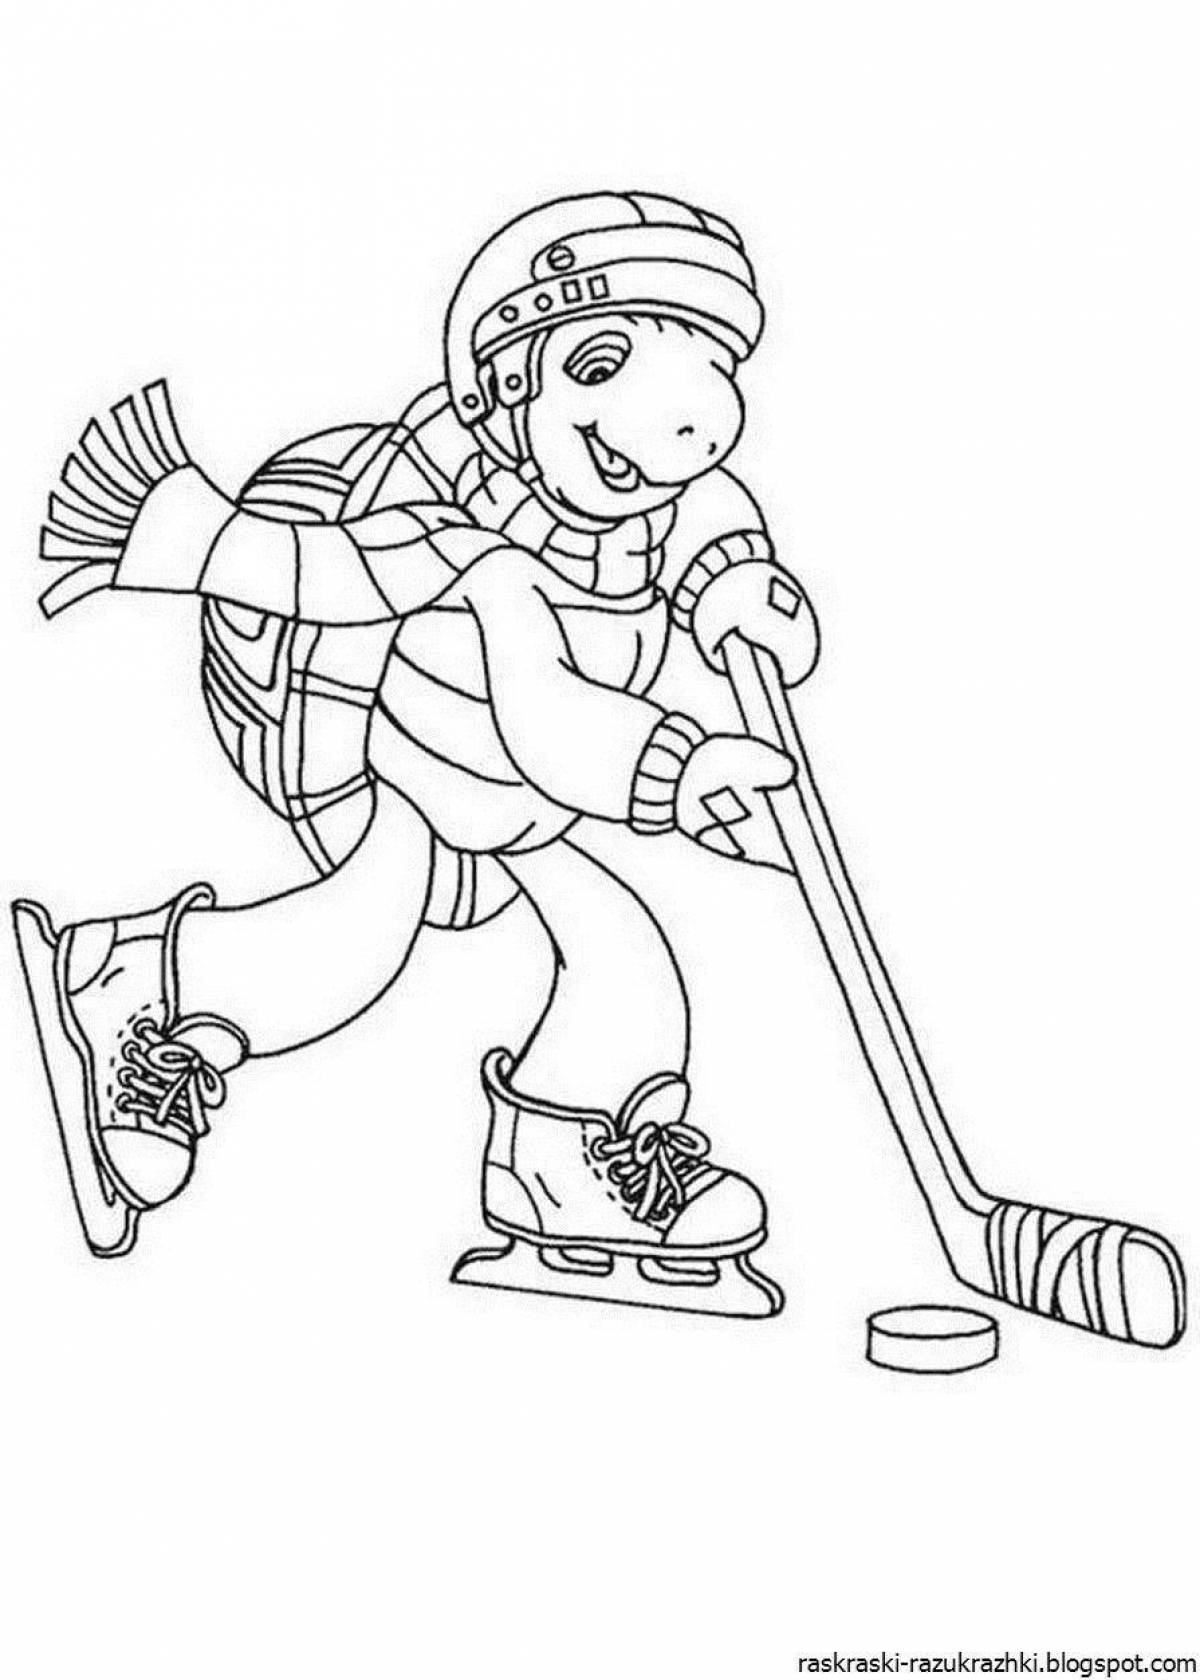 Amazing winter sports coloring pages